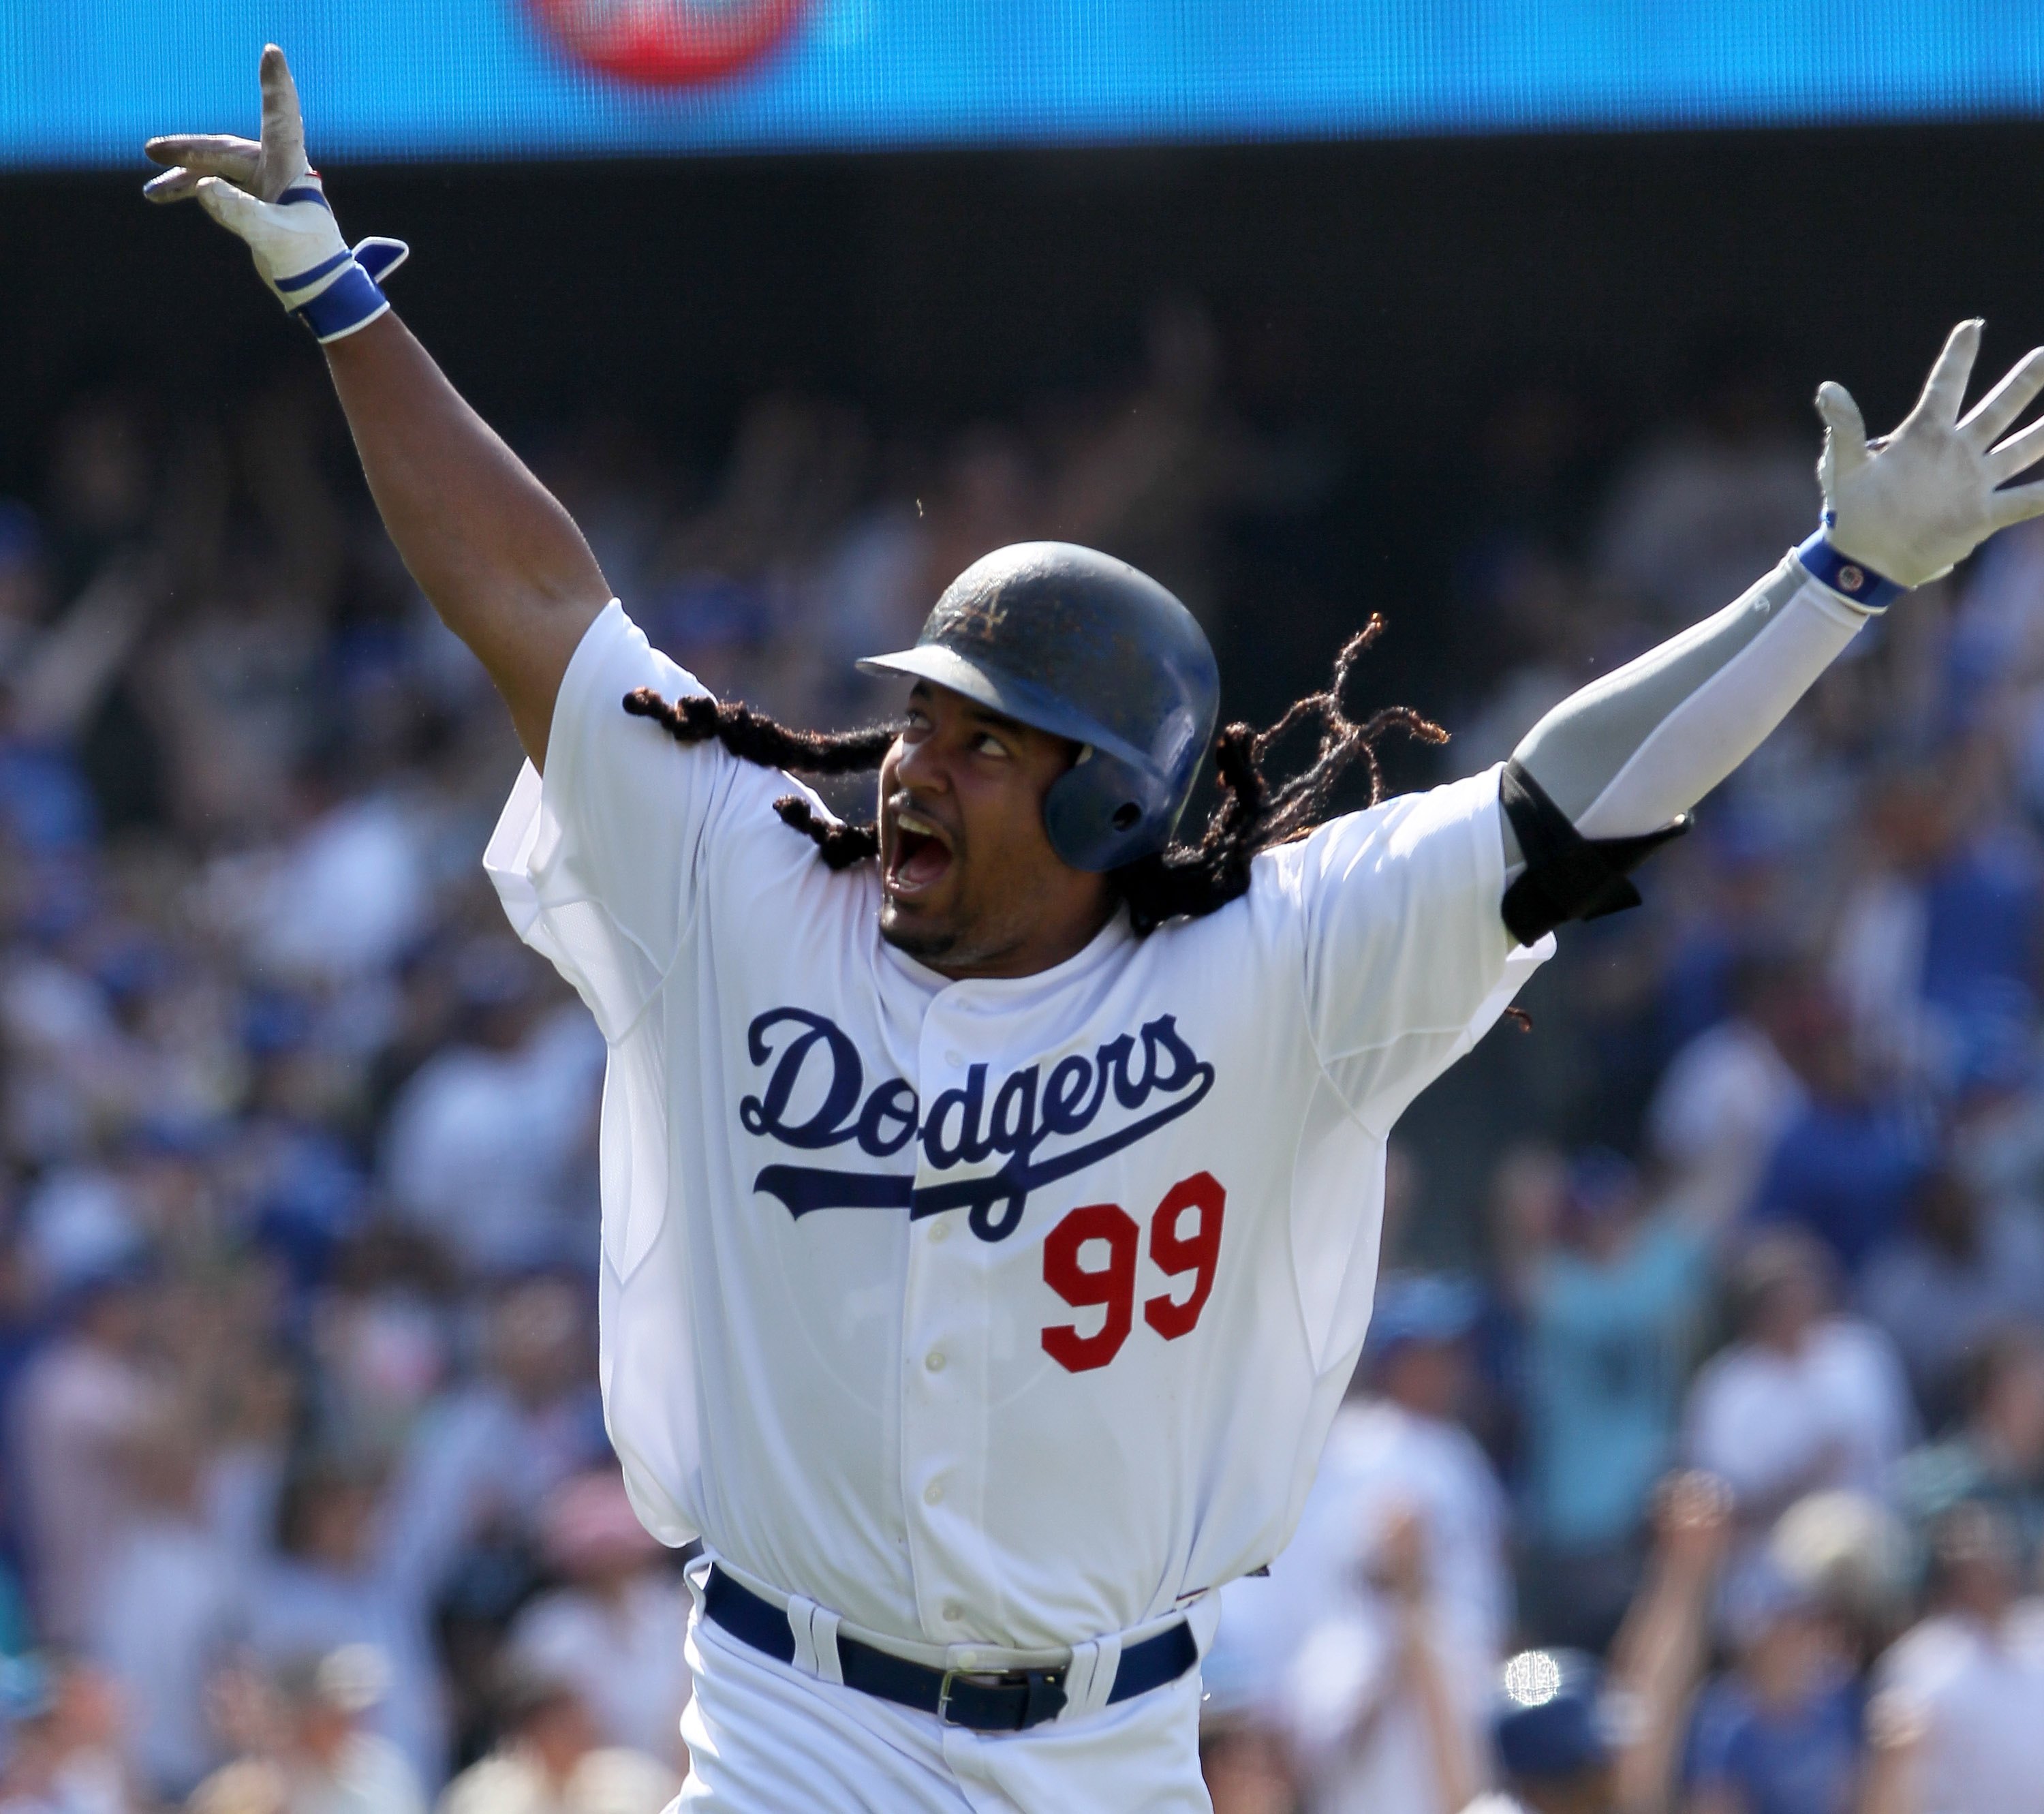 LOS ANGELES, CA - APRIL 18:  Manny Ramirez #99 of the Los Angeles Dodgers celebrates after hitting a two-run homerun in the eighth inning against the San Francisco Giants at Dodger Stadium on April 18, 2010 in Los Angeles, California. The Dodgers defeated